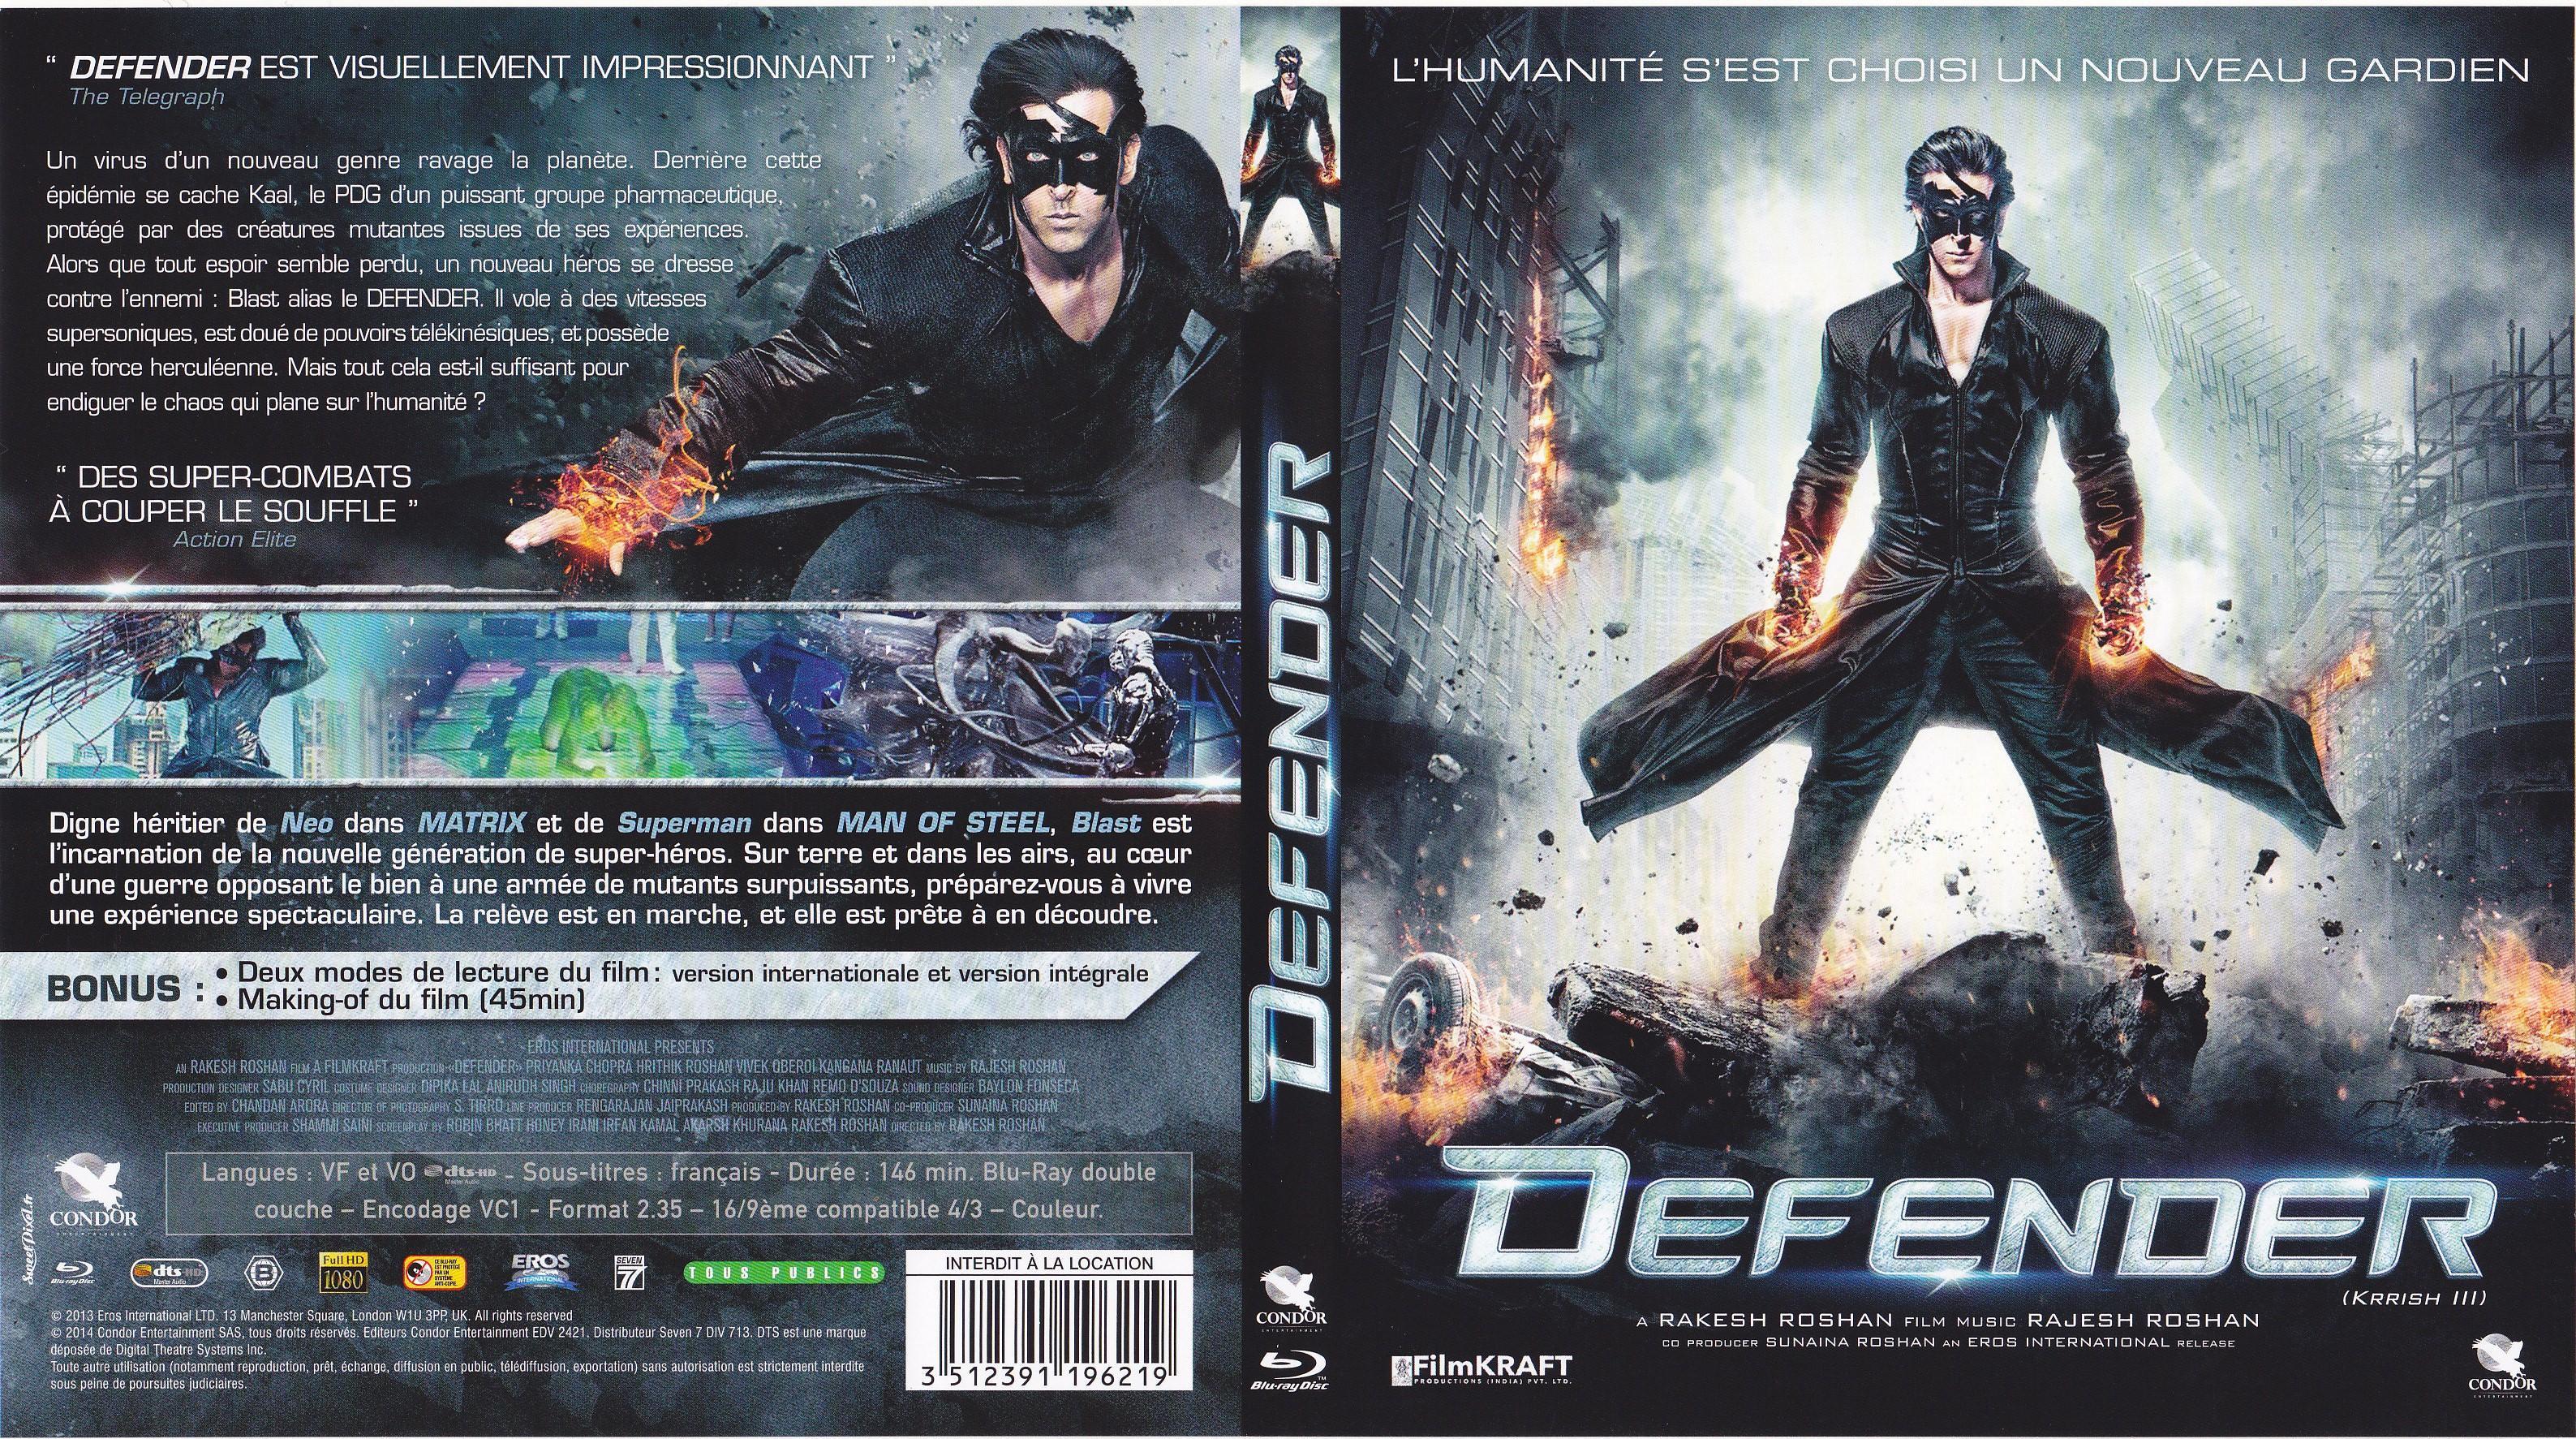 Jaquette DVD Defender (BLU-RAY)